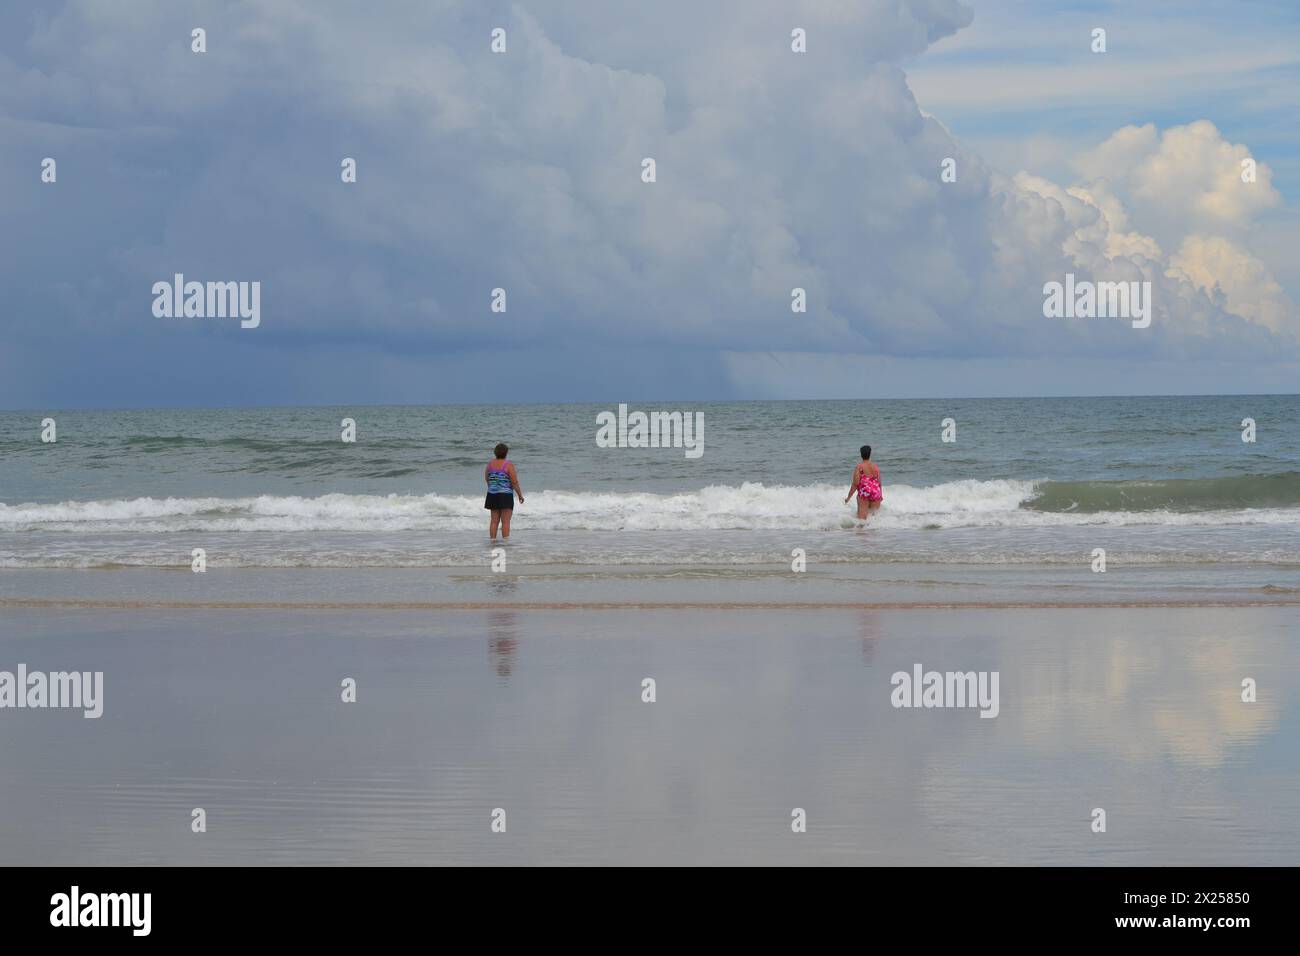 Two women stand at the water's edge as a foreboding rainstorm approaches Daytona Beach, Florida. Stock Photo